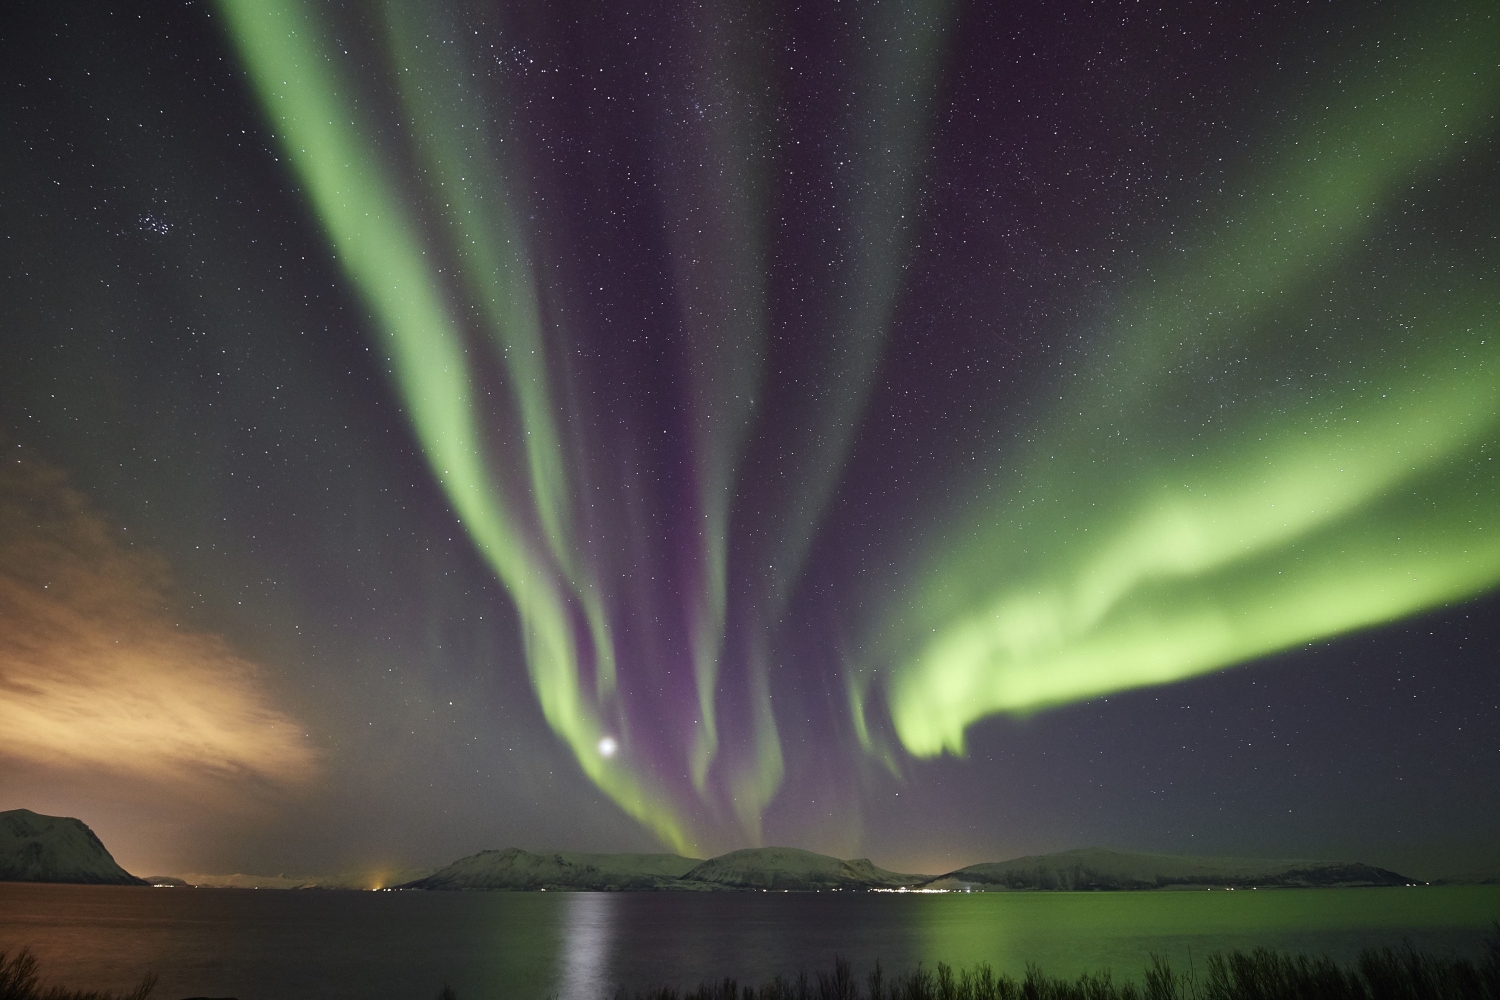 northern lights over the water, with some land in the background